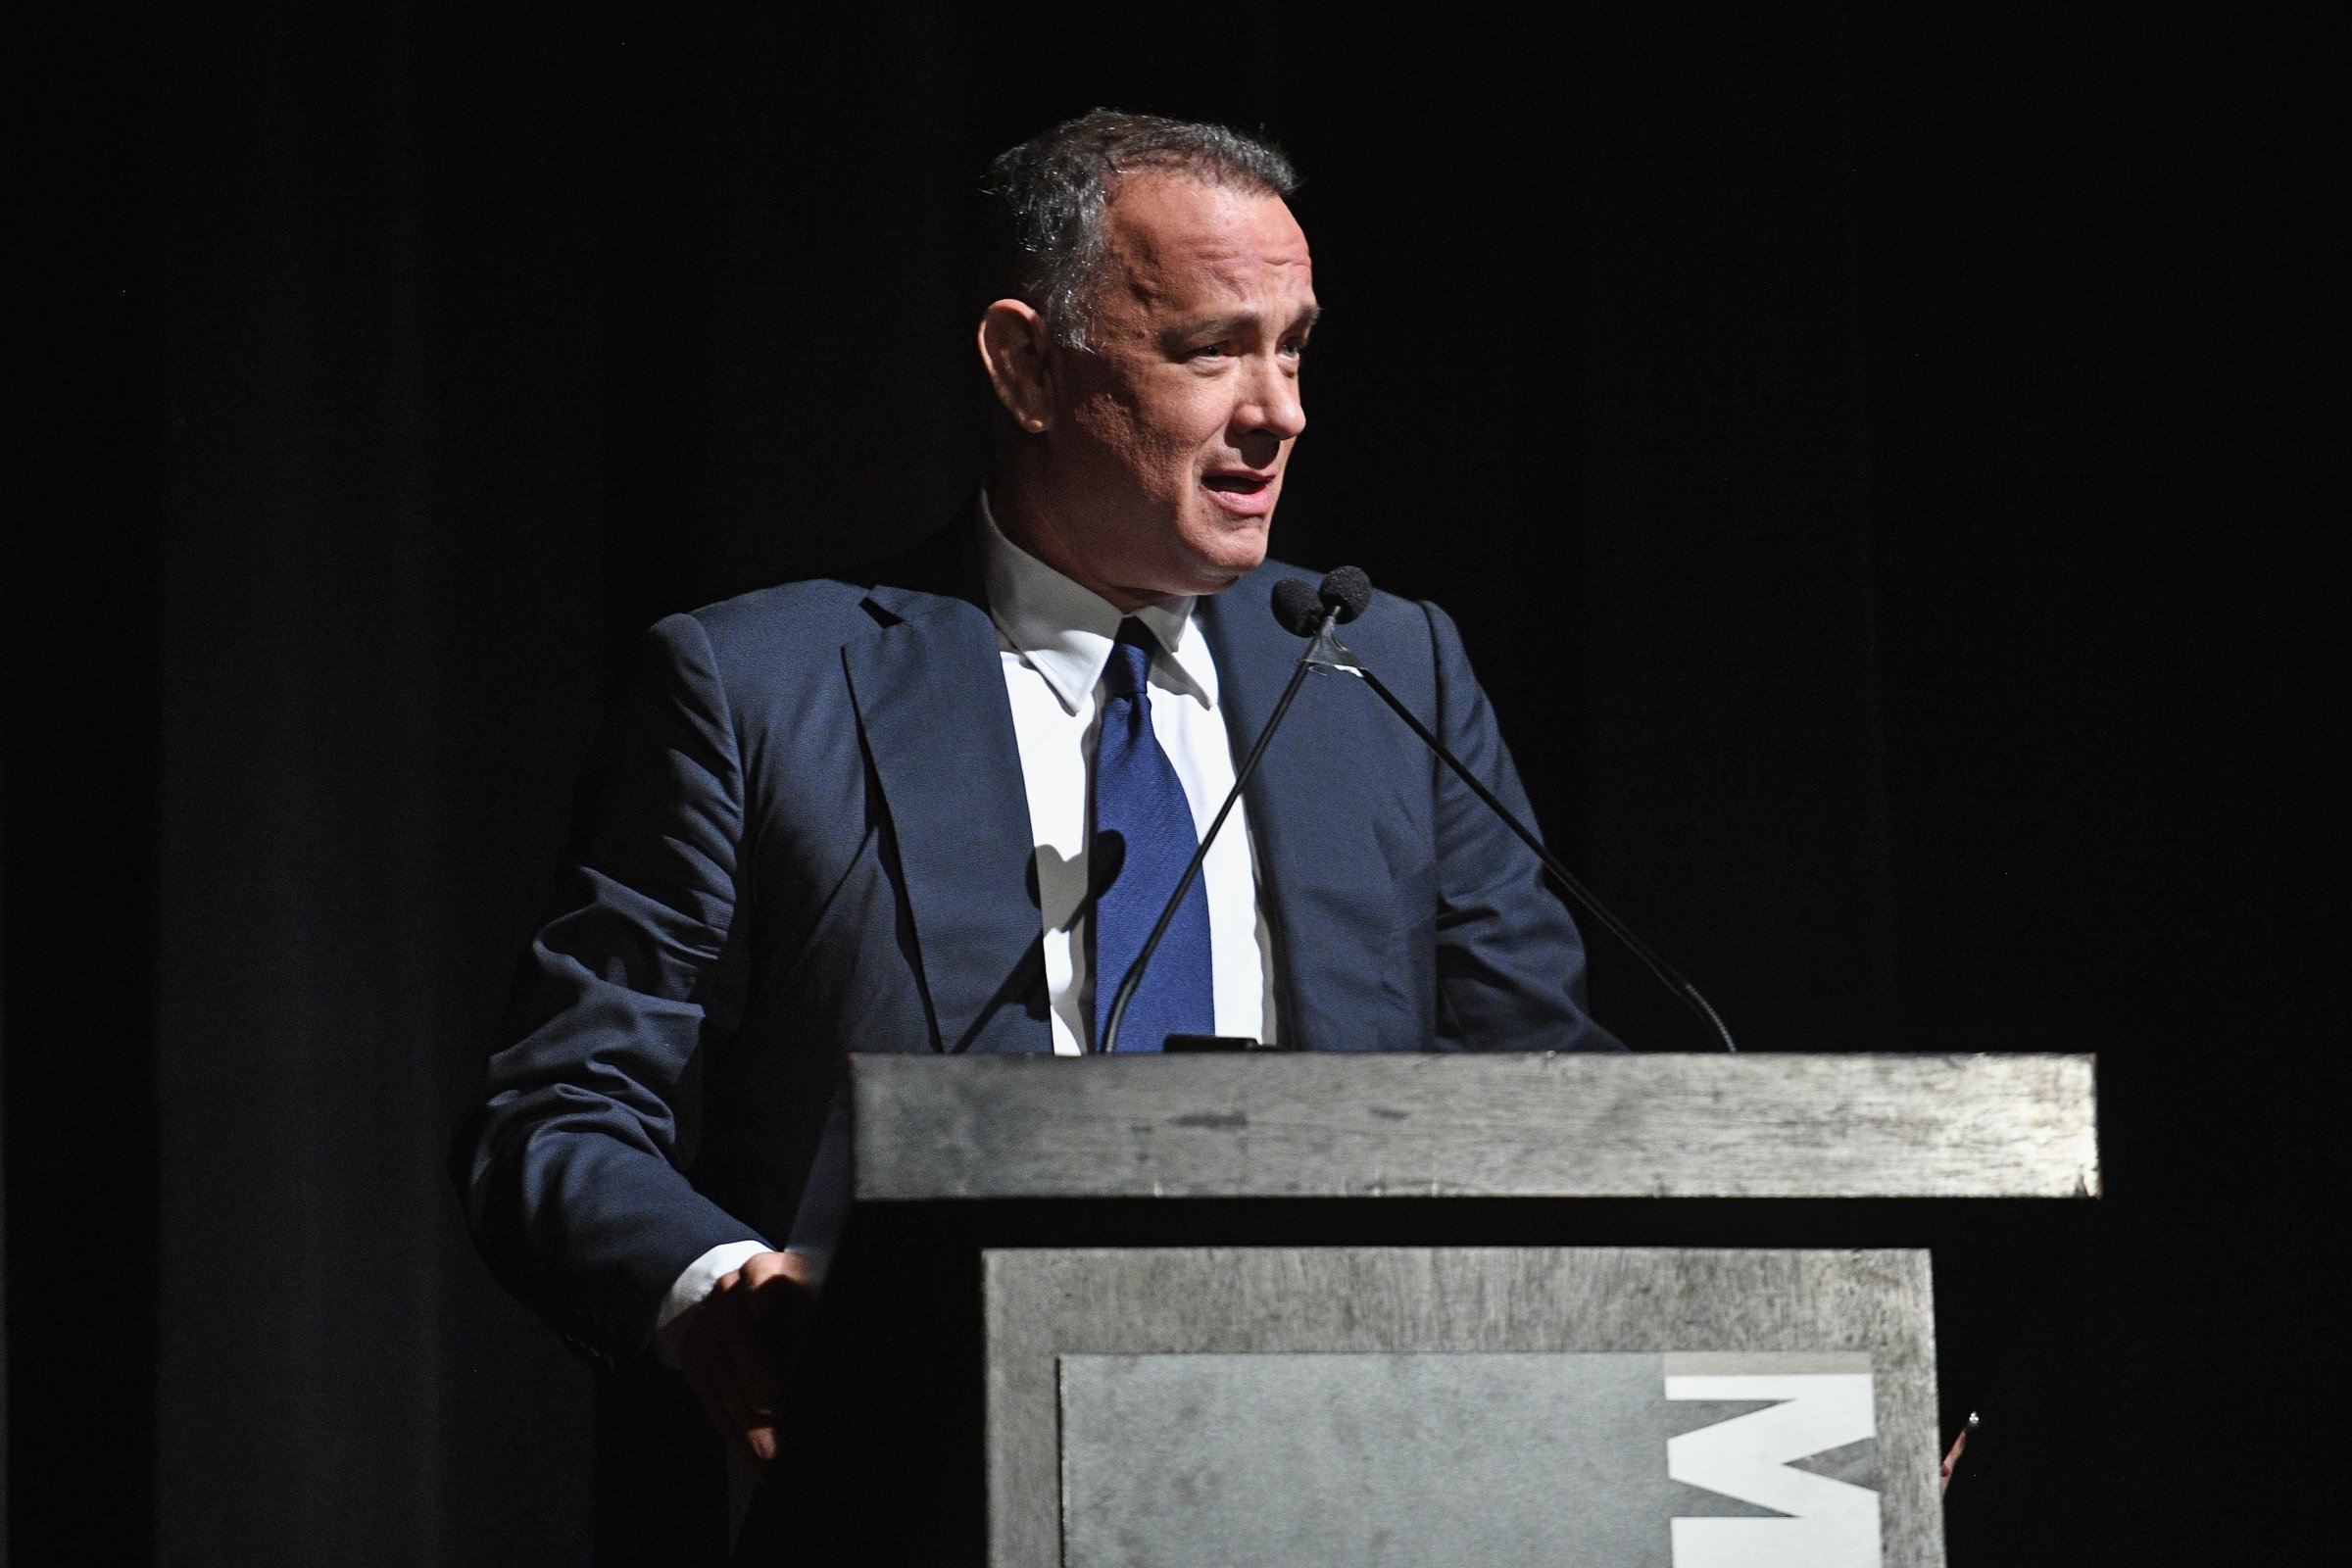 MoMA Film Benefit Presented By CHANEL, A Tribute To Tom Hanks - Inside